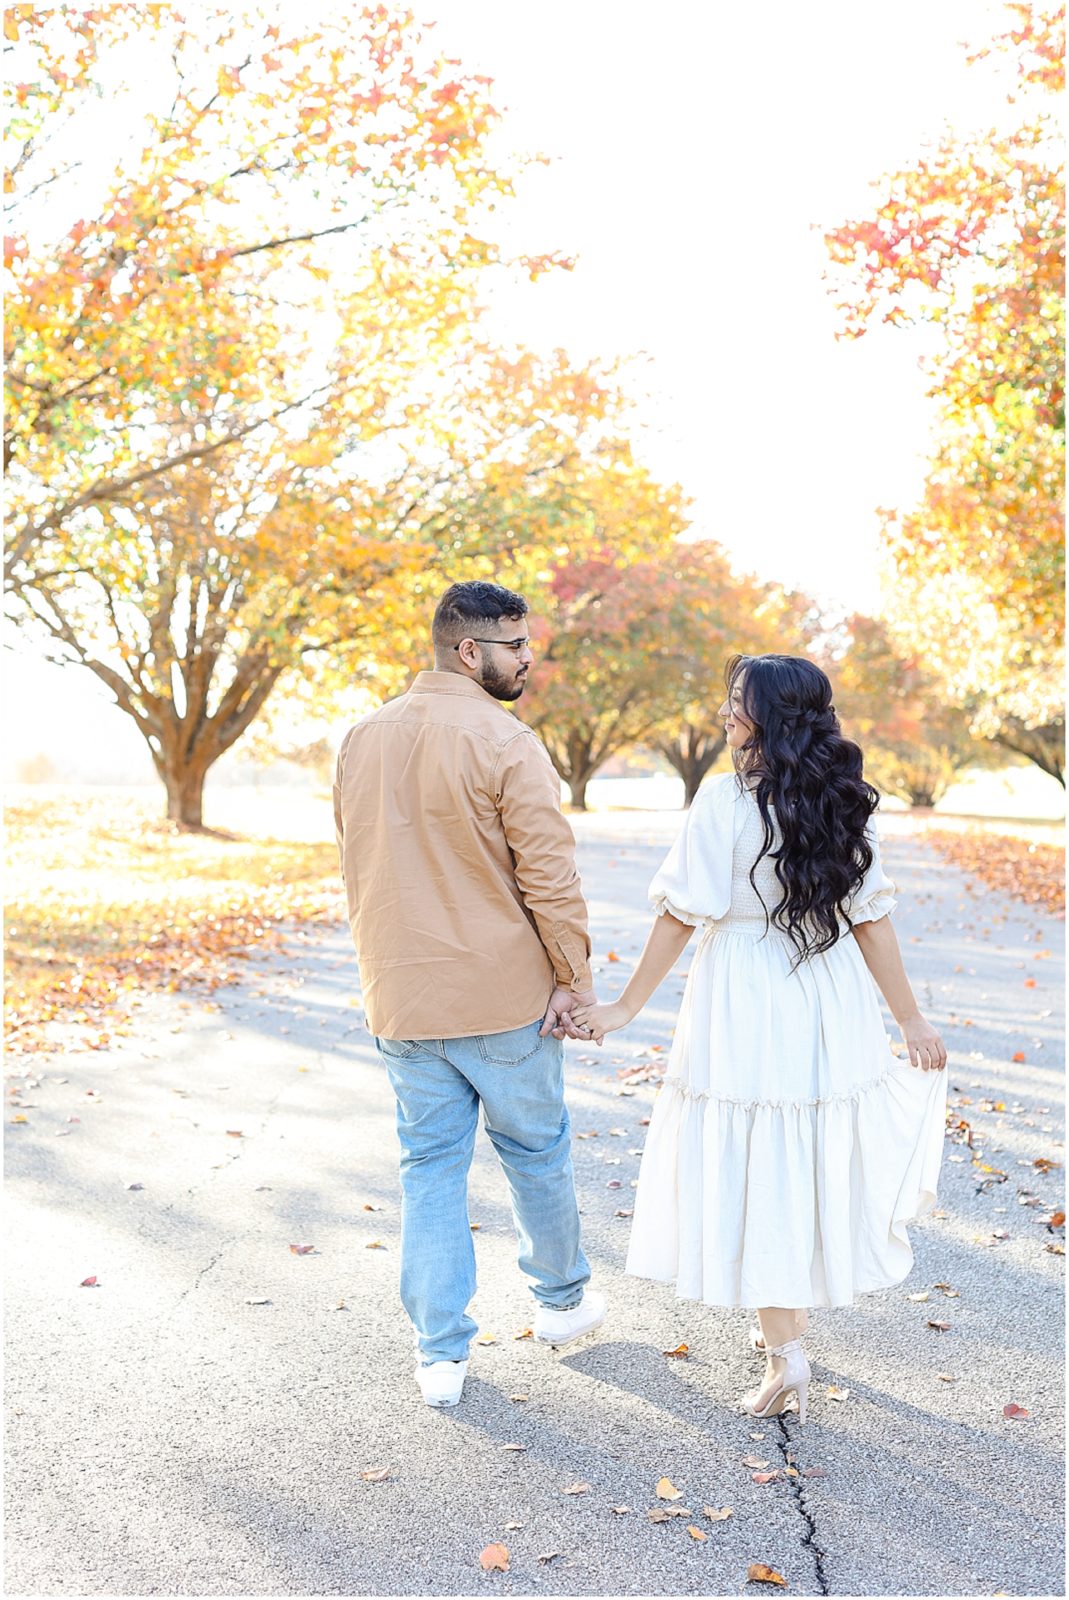 Walking away | Family Photos | Family Photographer in Kansas | Family Photography Kansas City | Shawnee Mission Park | Where to take photos in the fall | What to wear for a fall engagement or family session | Kansas City Missouri Wedding & Portrait Photography